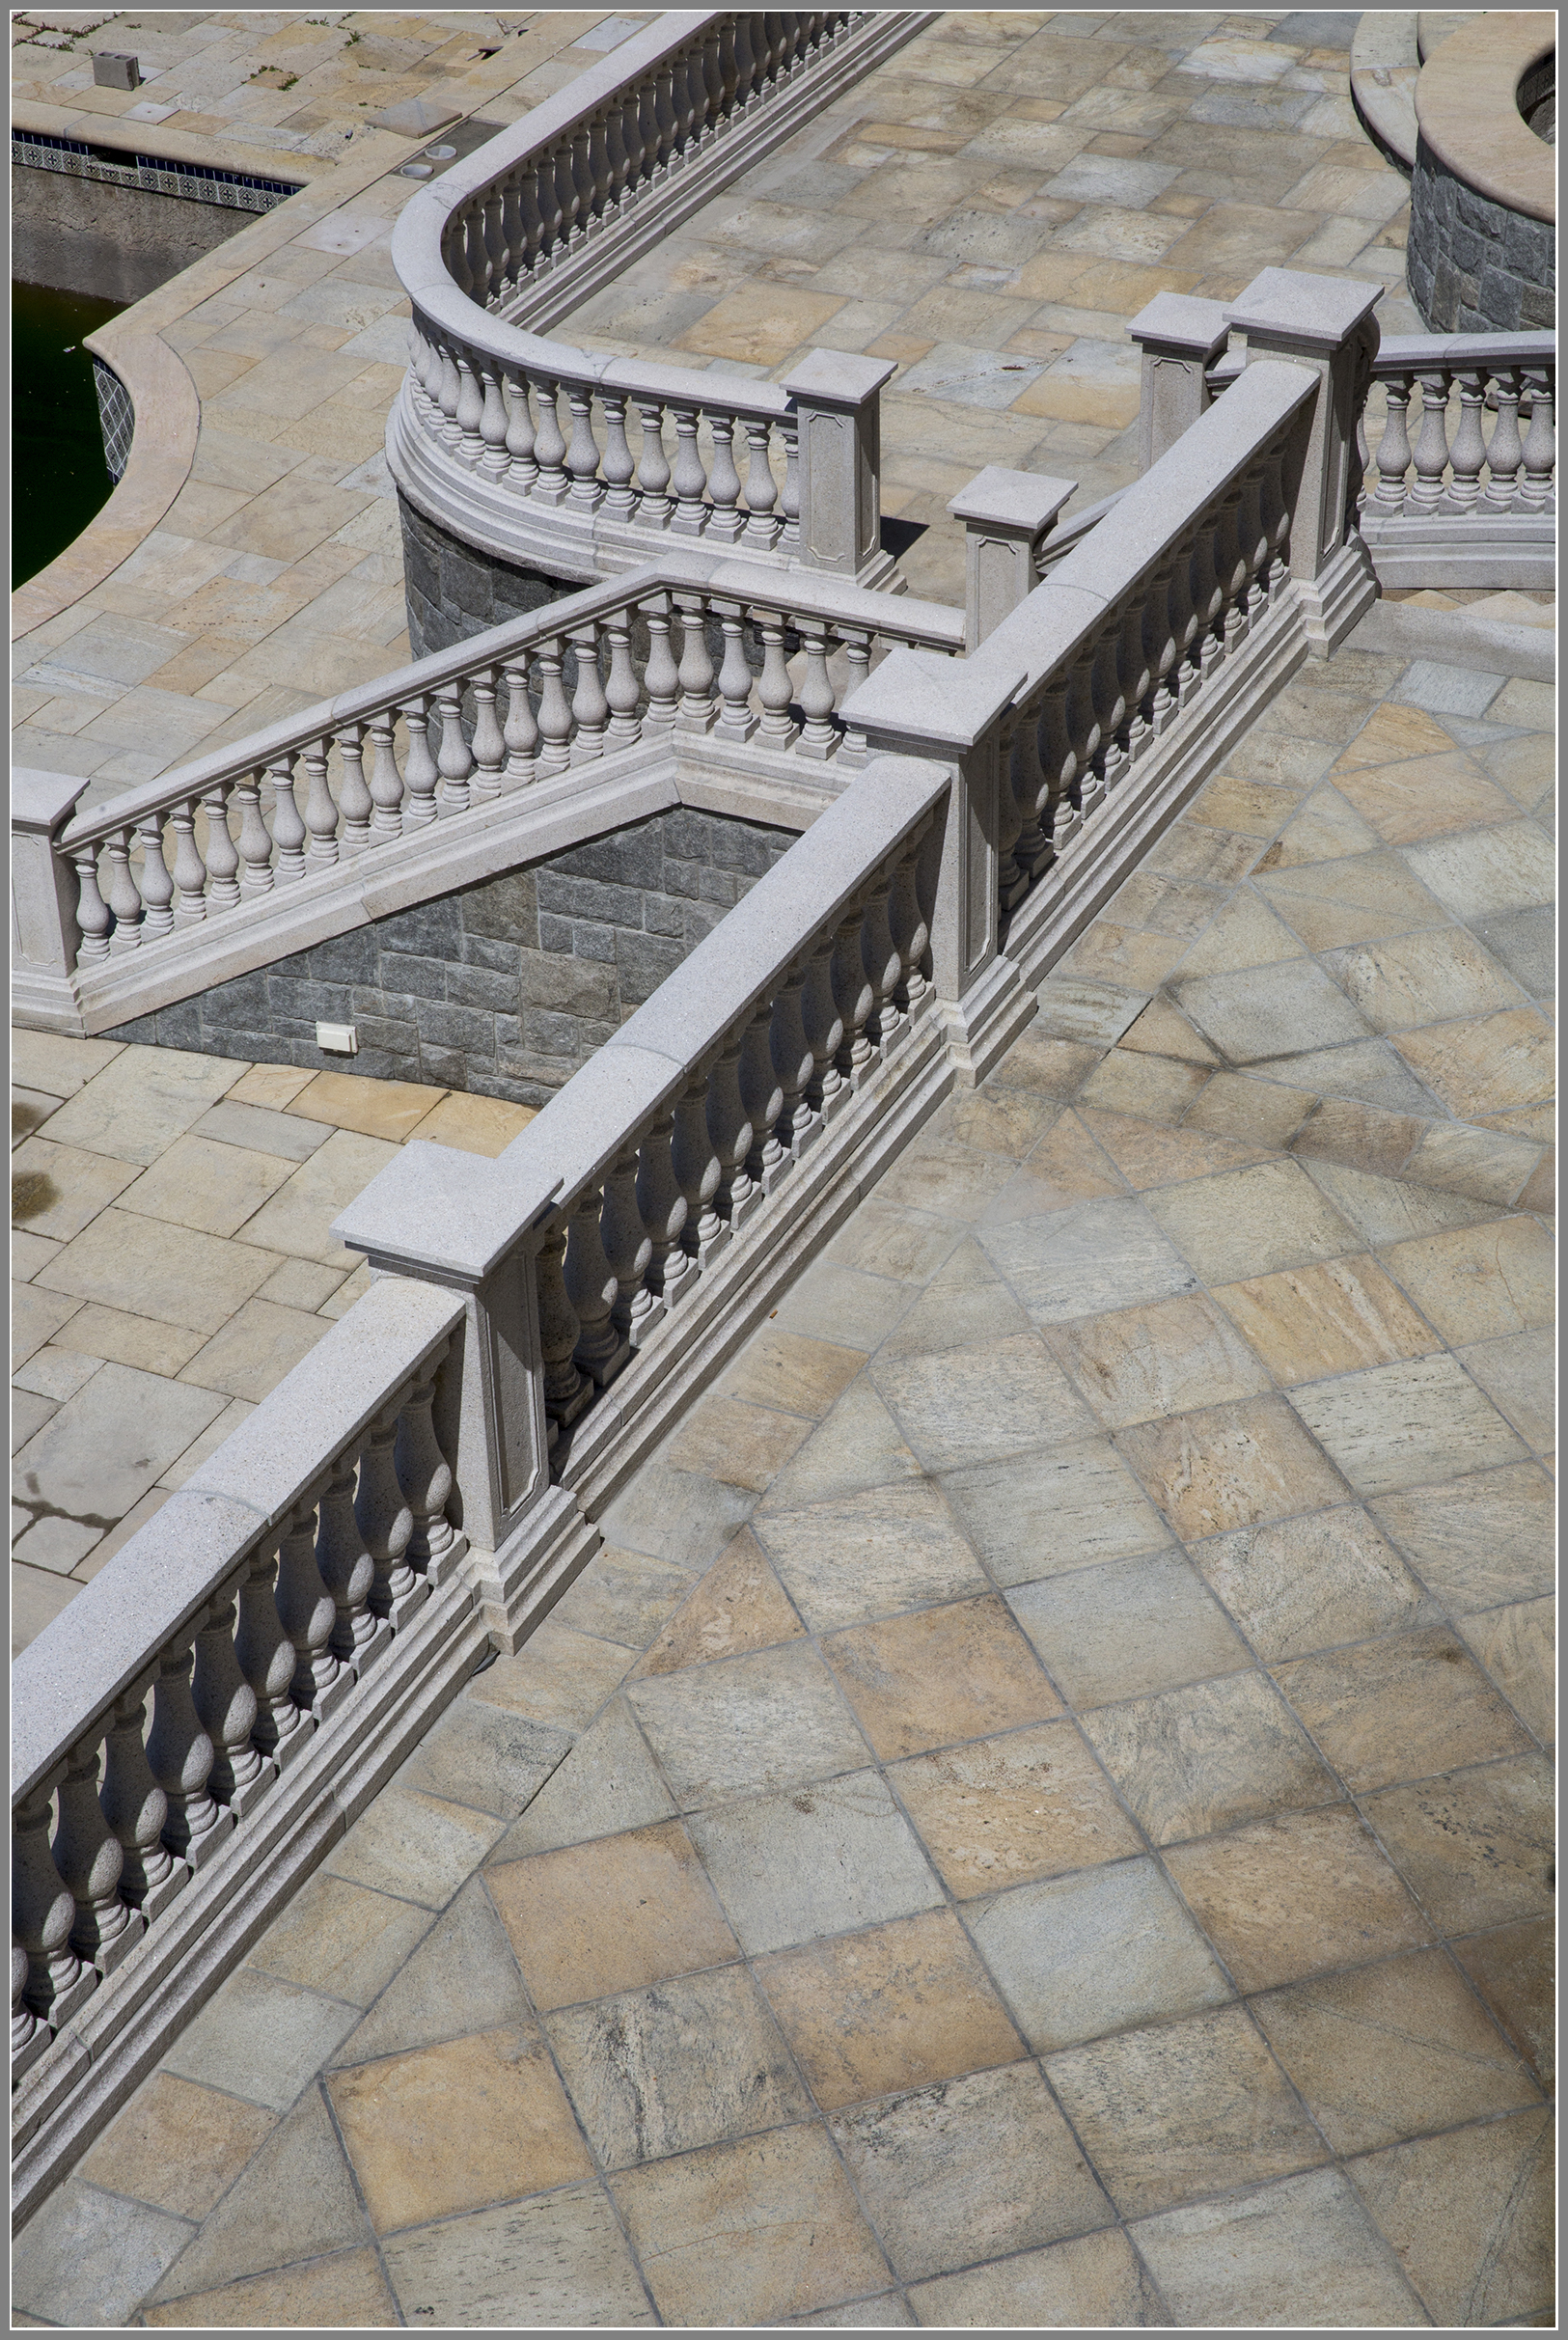 Granite balustrade system and patio